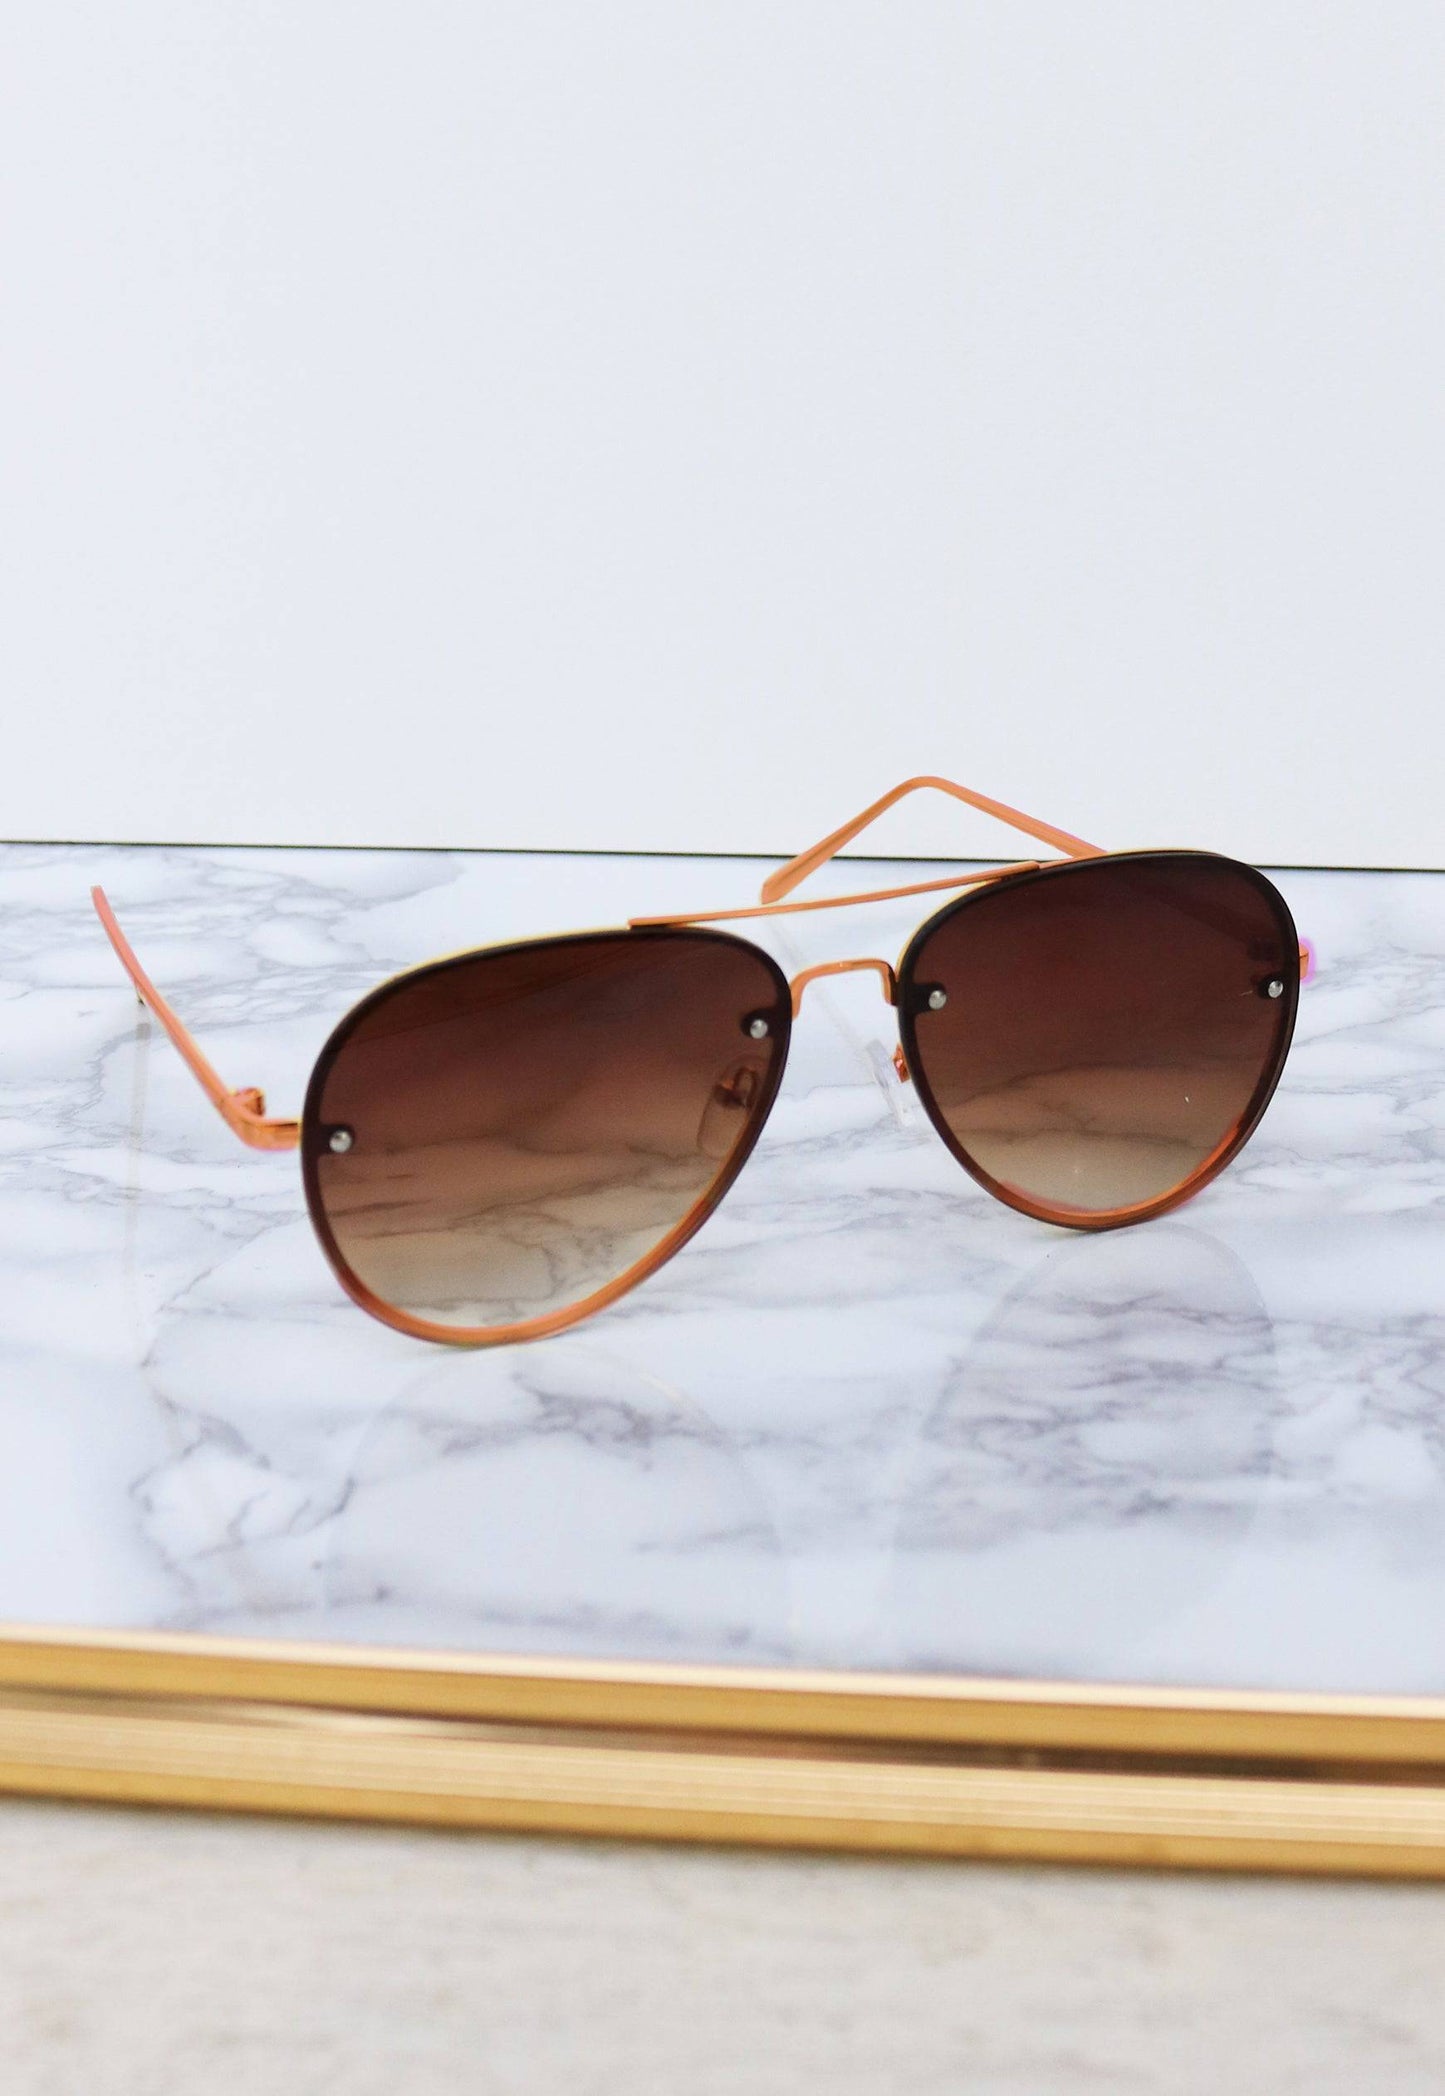 Lana Metal Rim Graduated Lens Oversized Aviator Sunglasses in Brown with Rose Gold Frame - One Nation Clothing